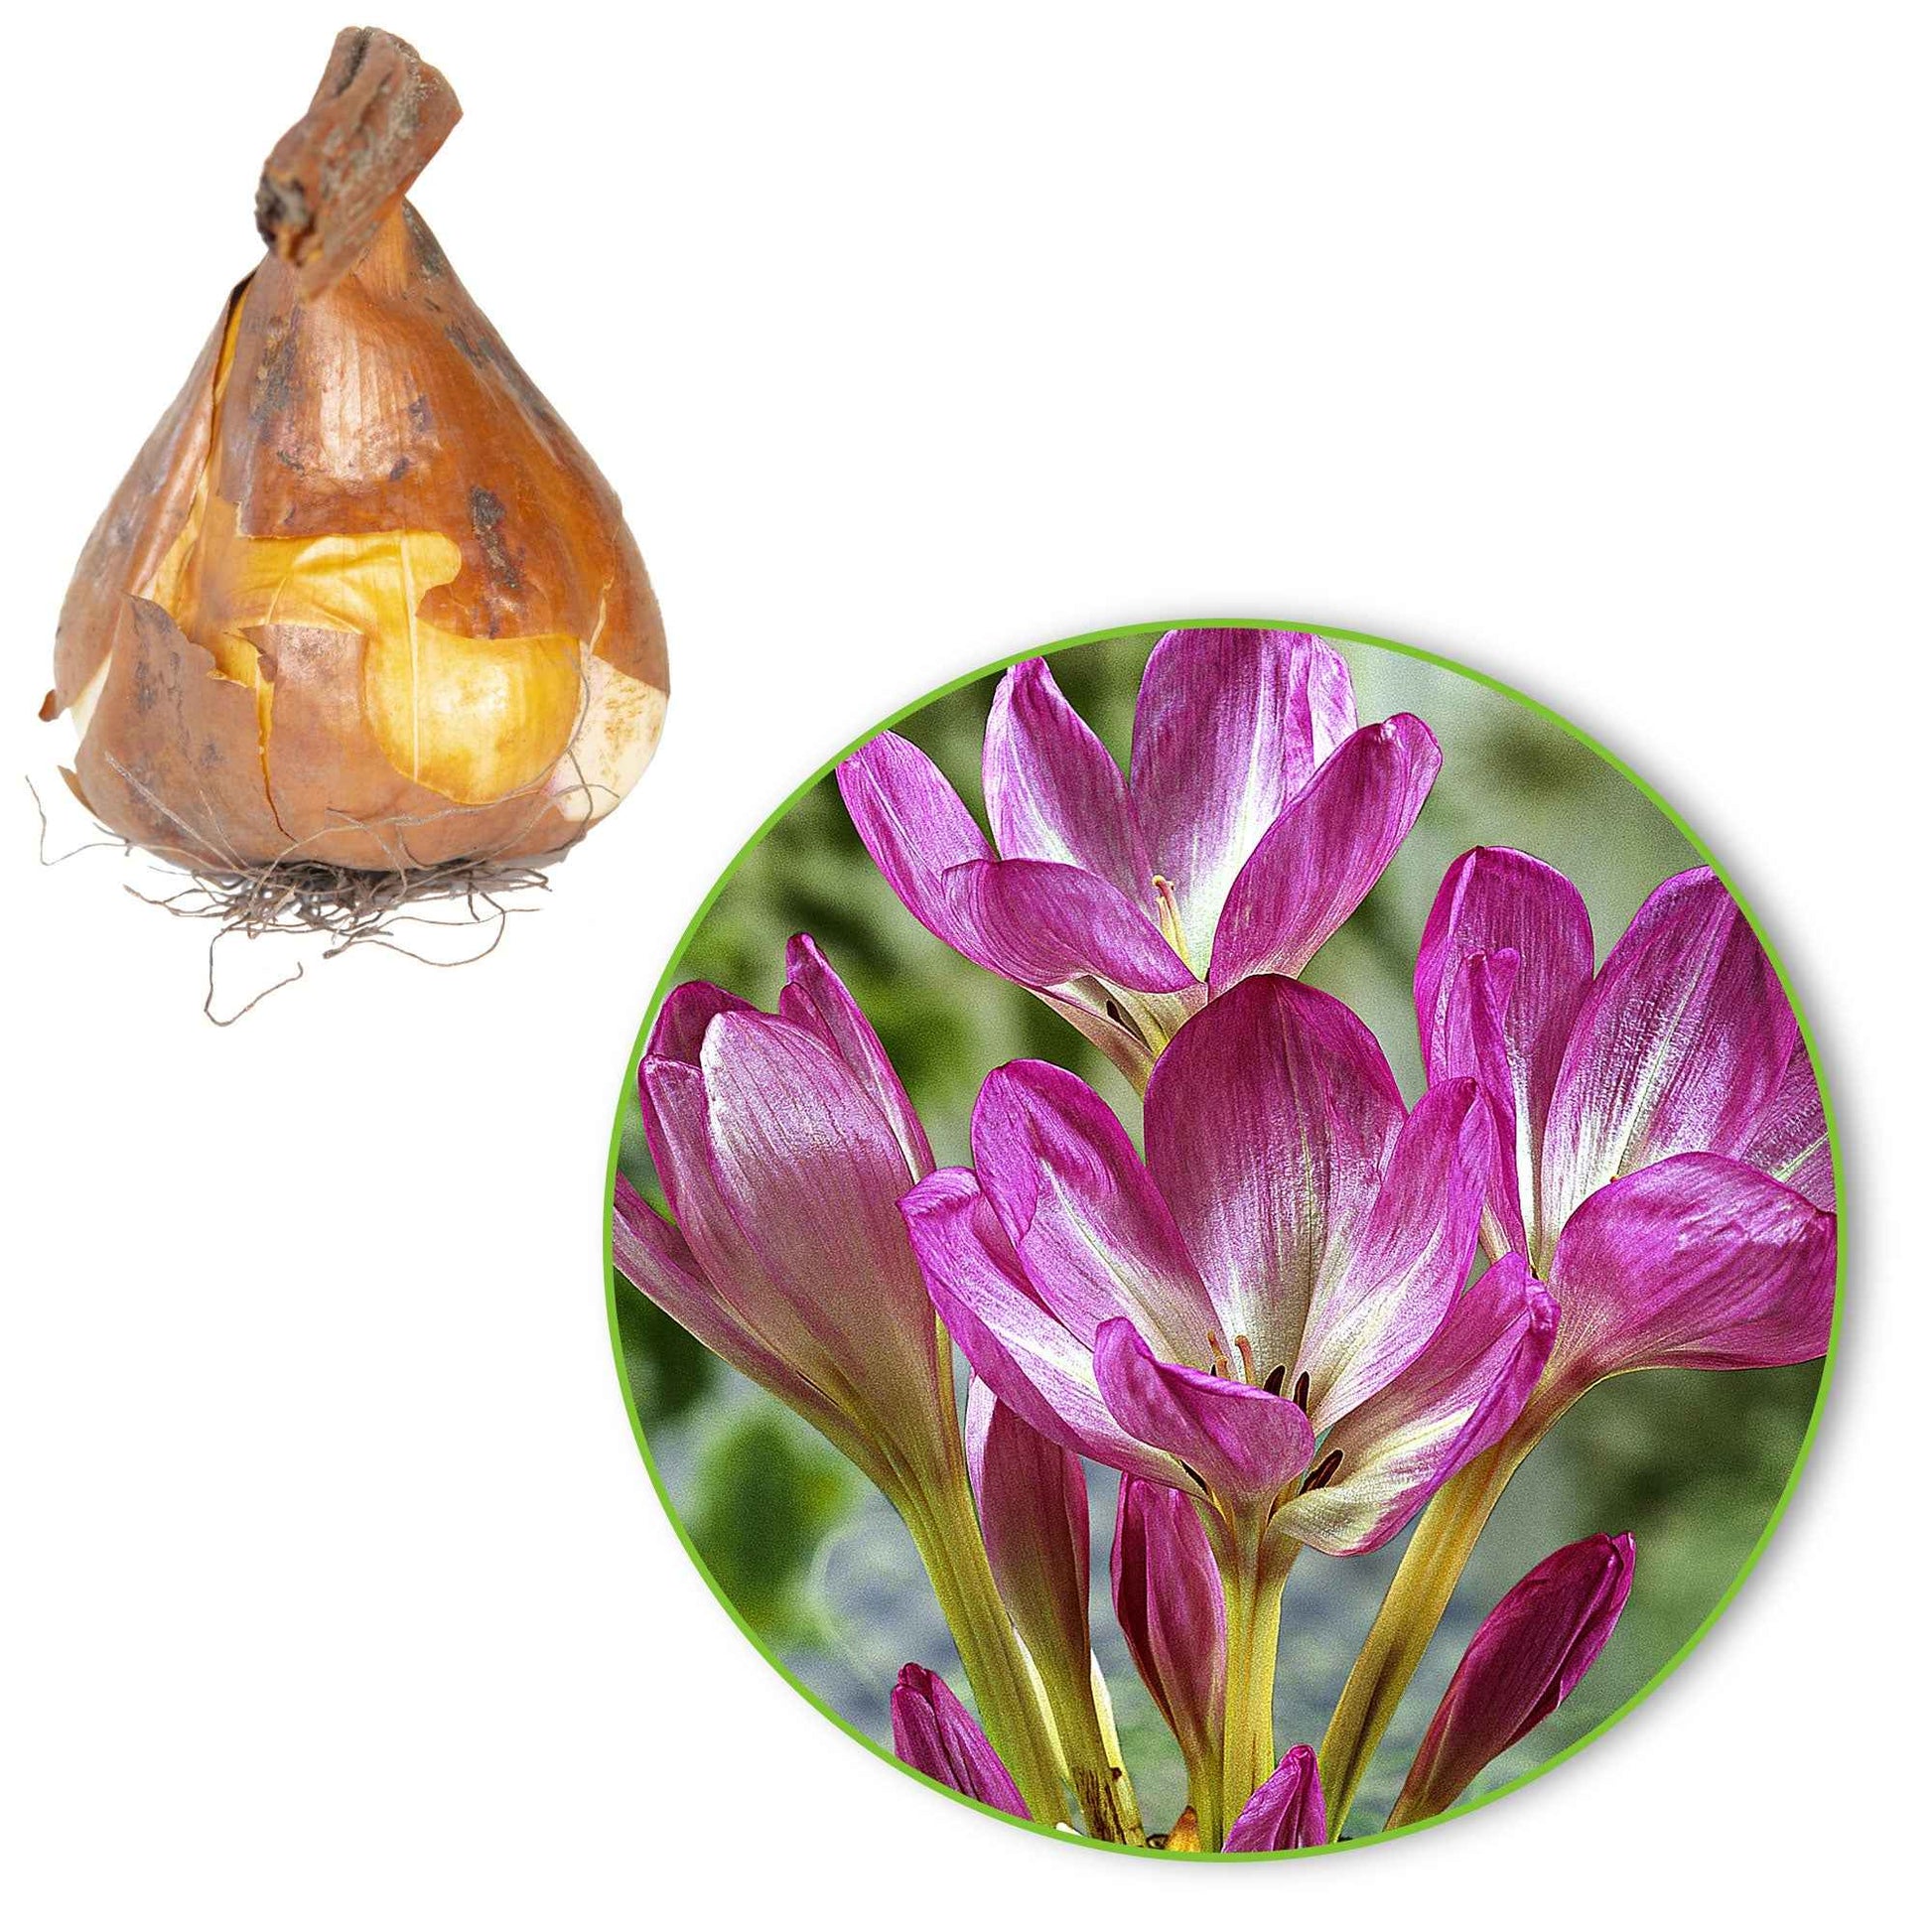 Herbstzeitlose 'The Giant' - Colchicum 'the giant'